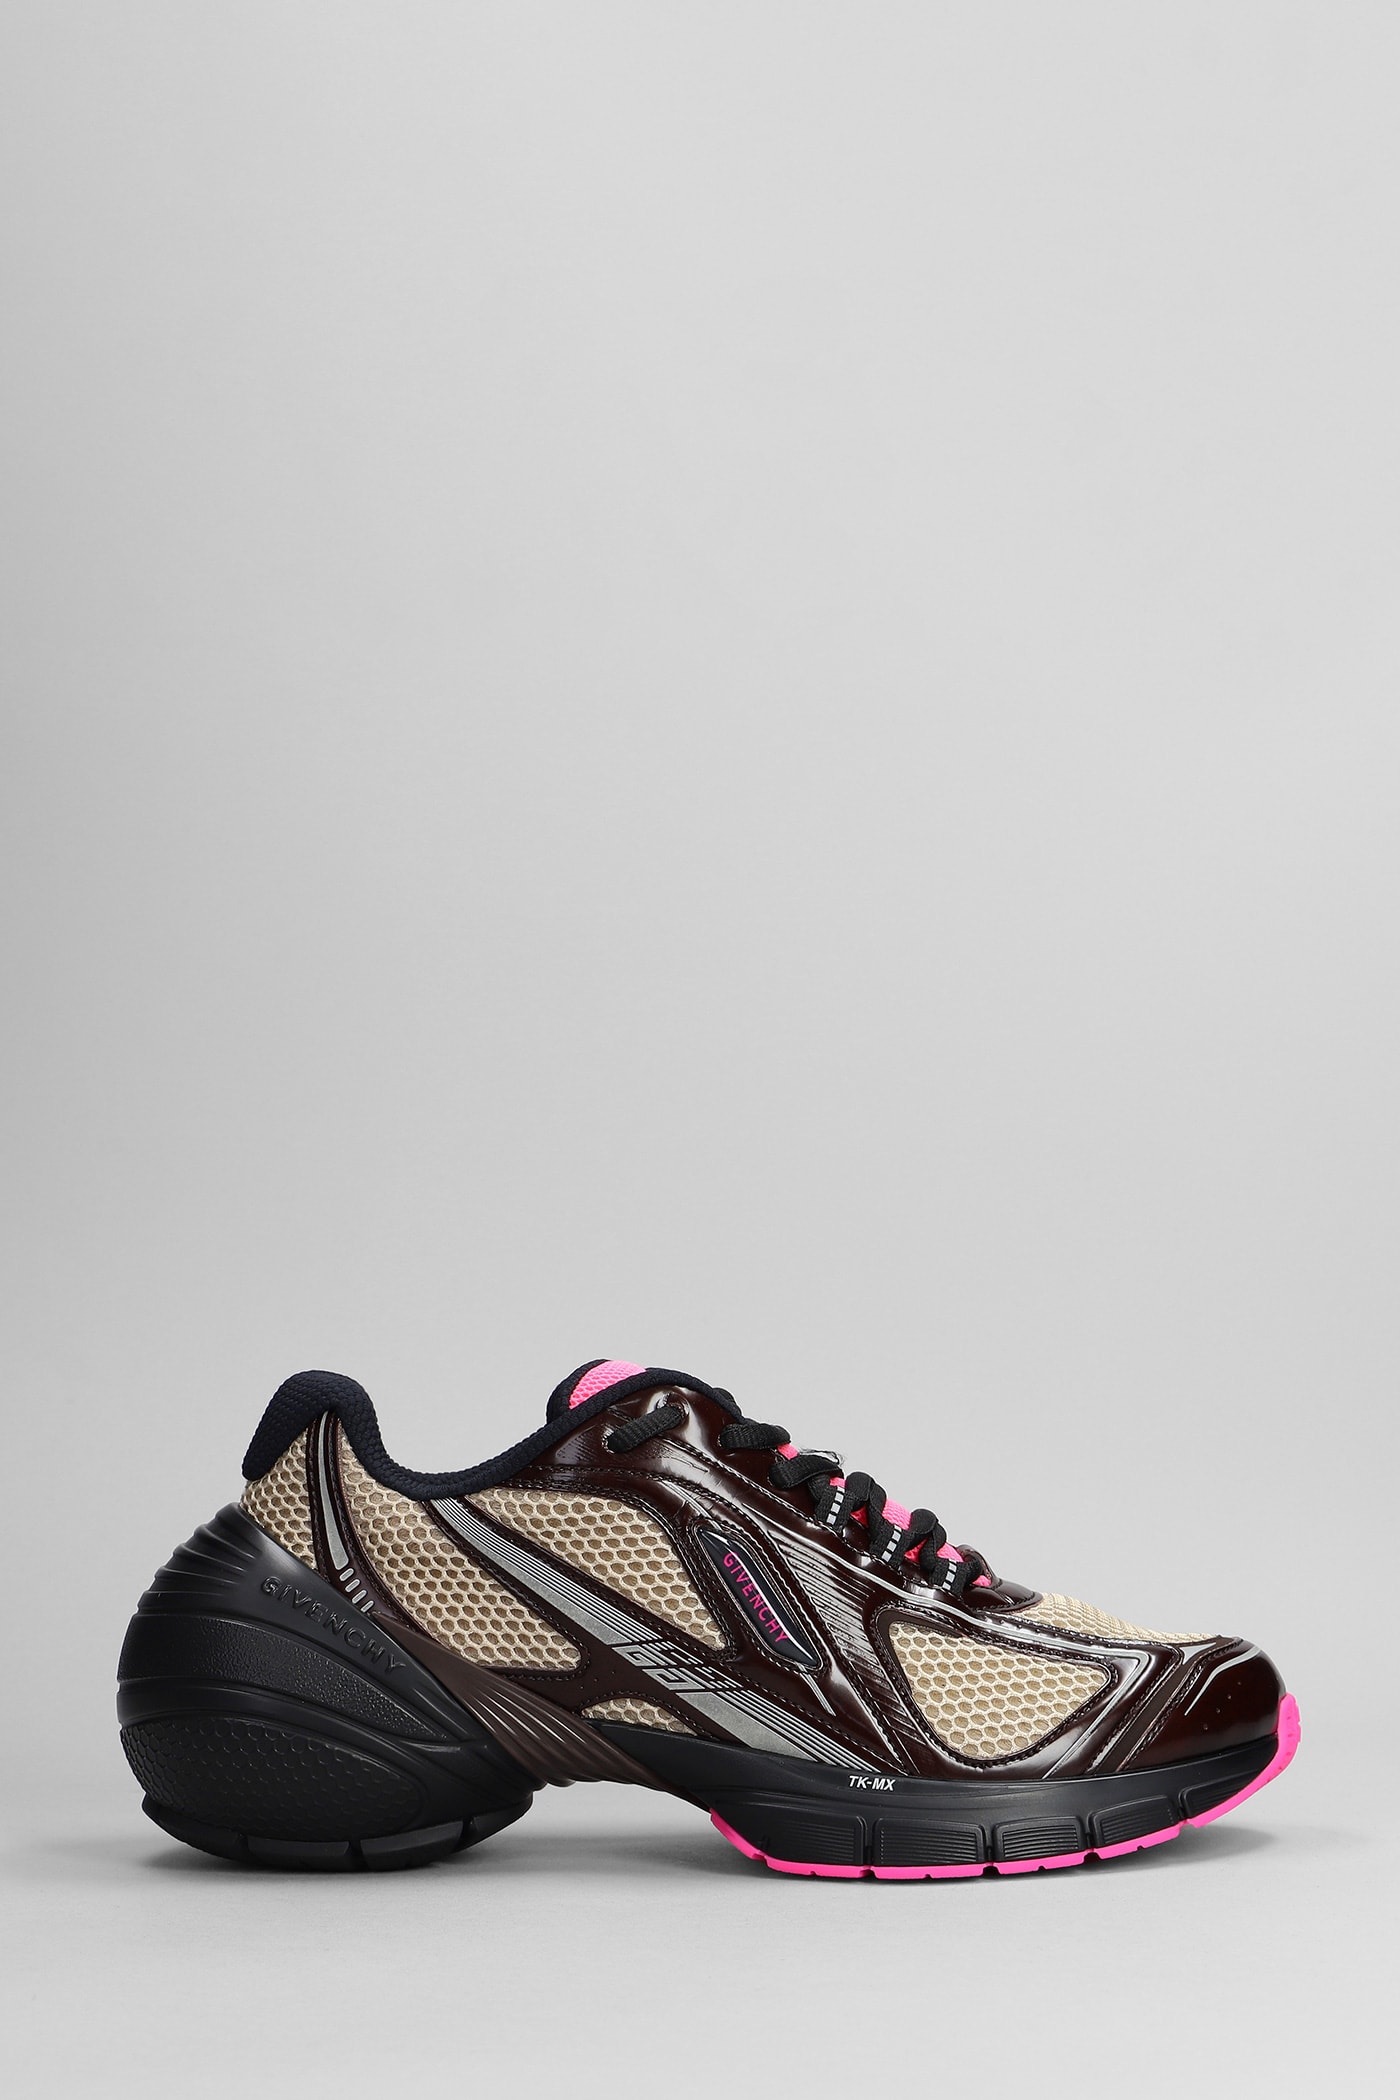 GIVENCHY TK-MX RUNNER SNEAKERS IN BORDEAUX POLYPROPYLENE